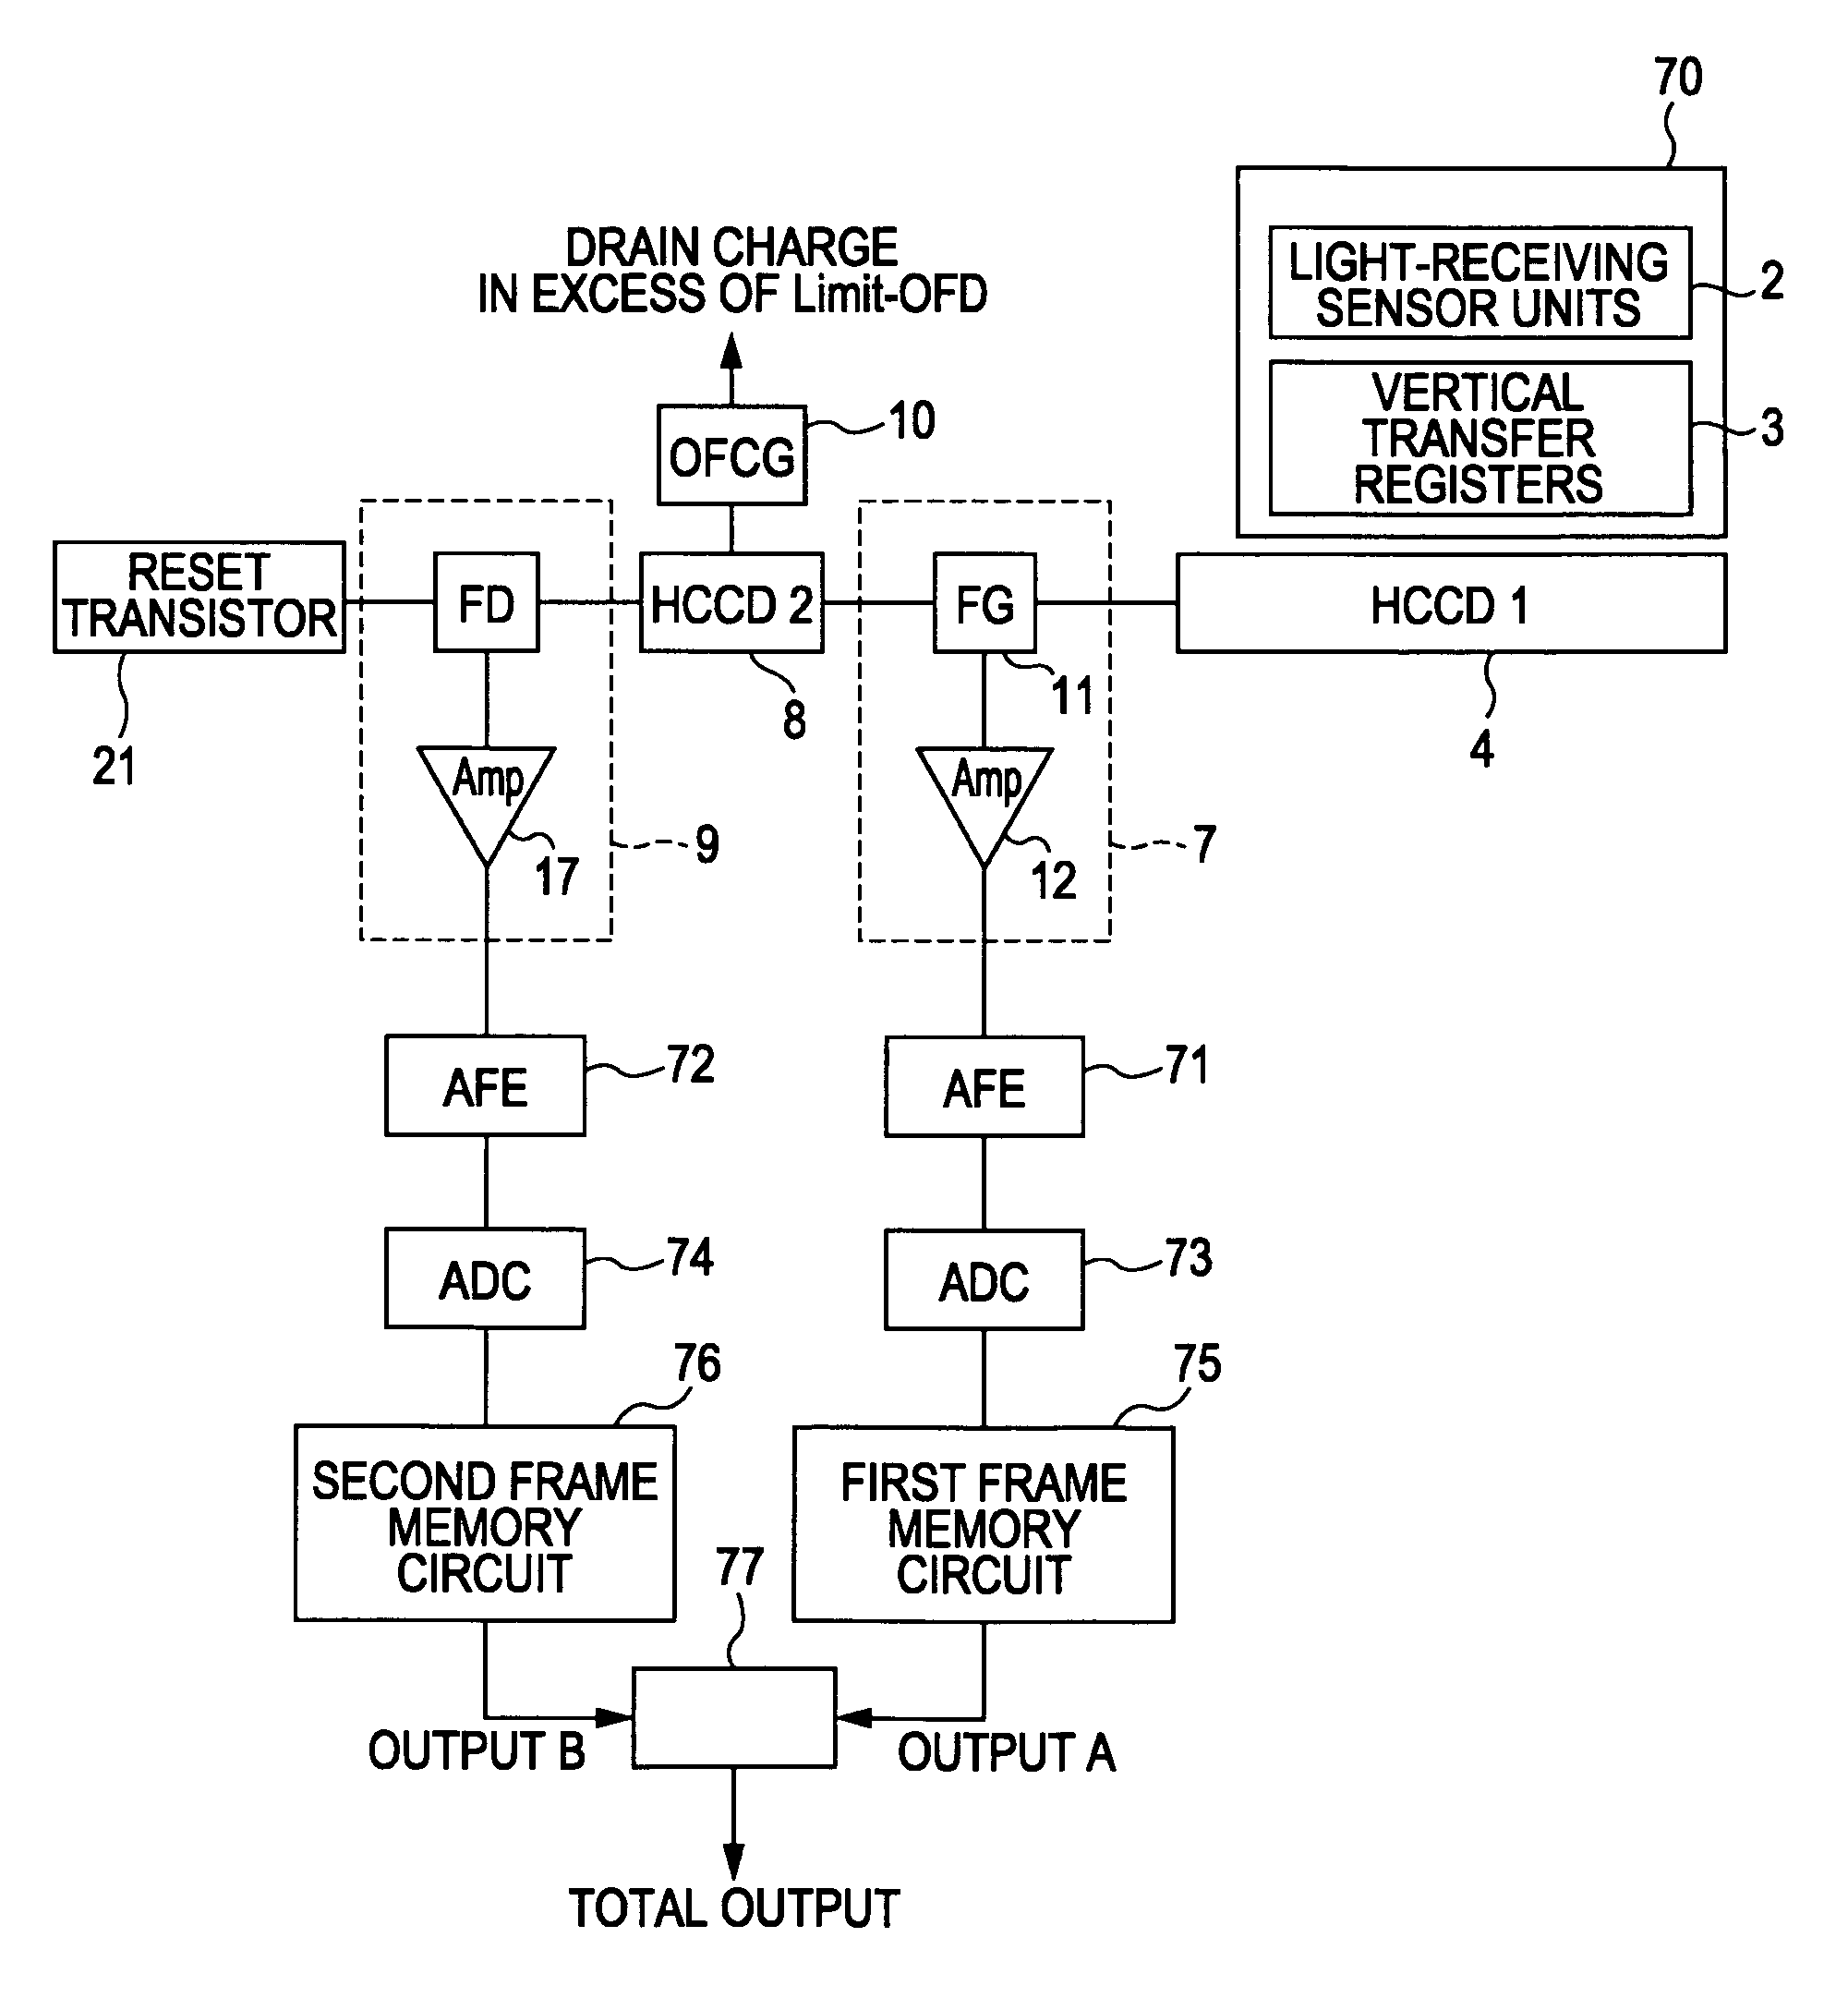 Solid-state image pickup device with an improved output amplifier circuitry